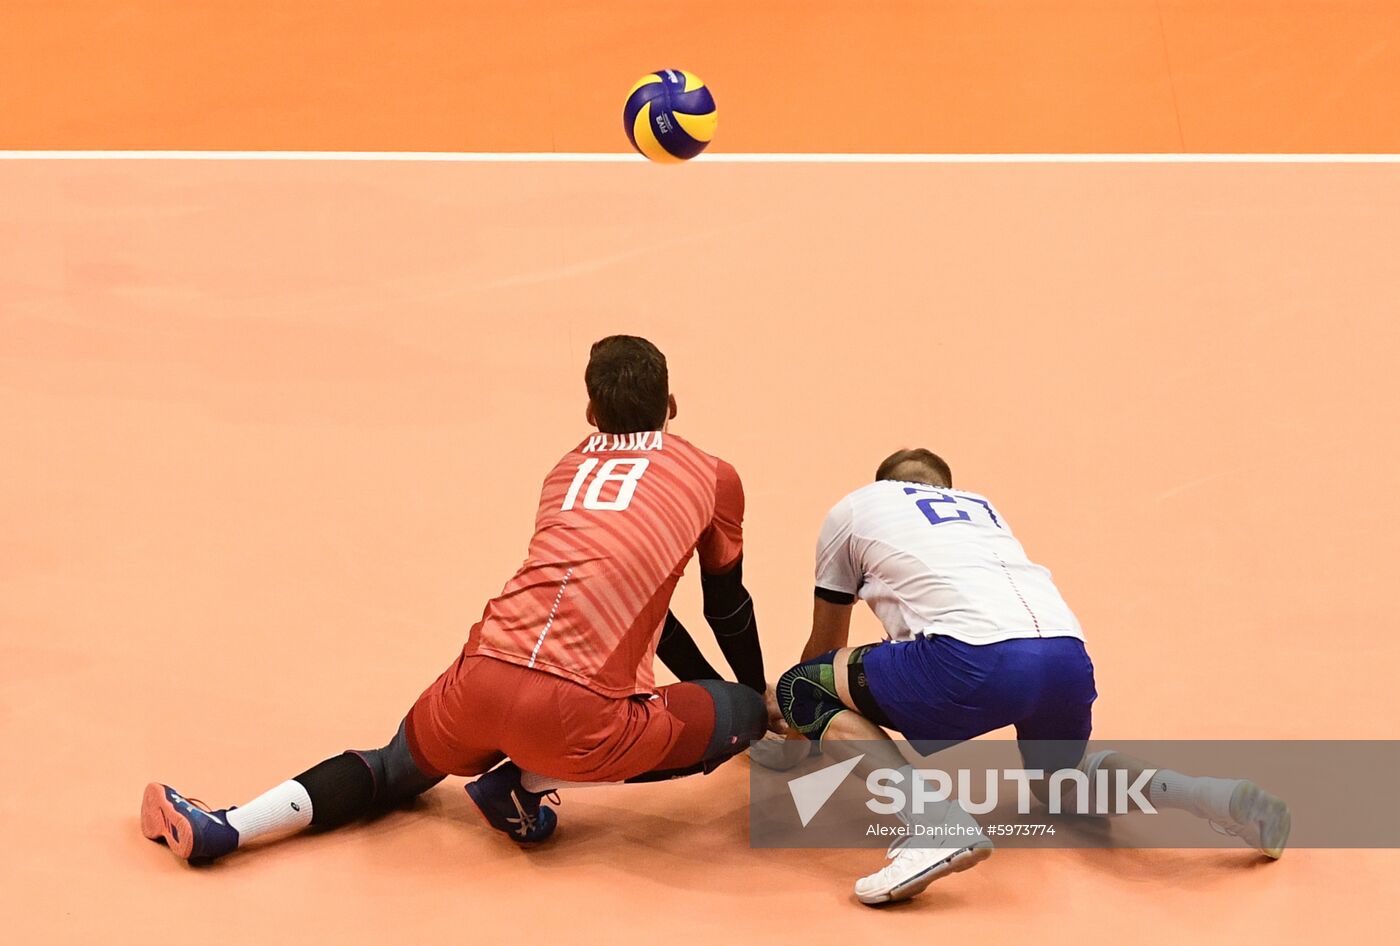 Russia Volleyball 2020 Olympic Qualifiers Russia - Iran